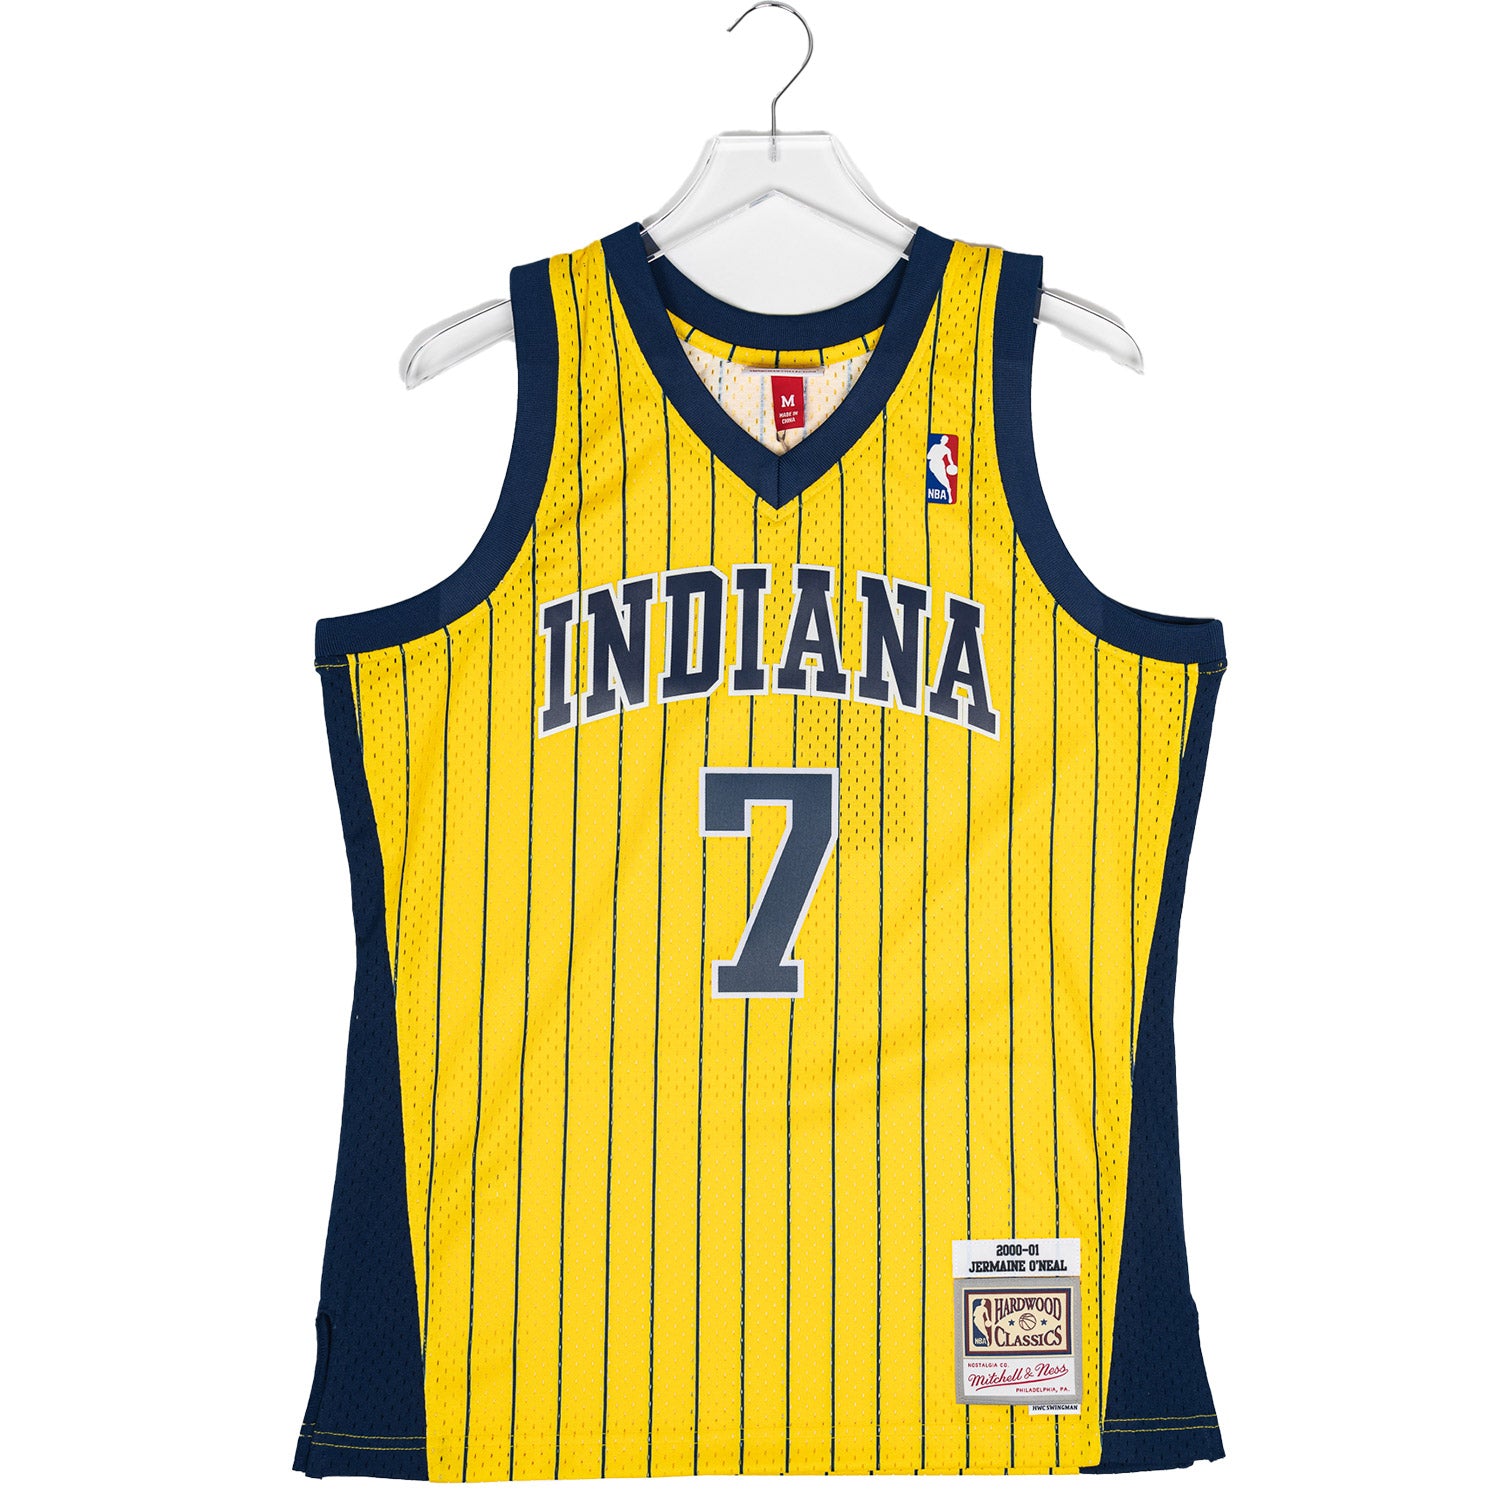 Indiana Pacers Throwback Jerseys, Vintage NBA Gear